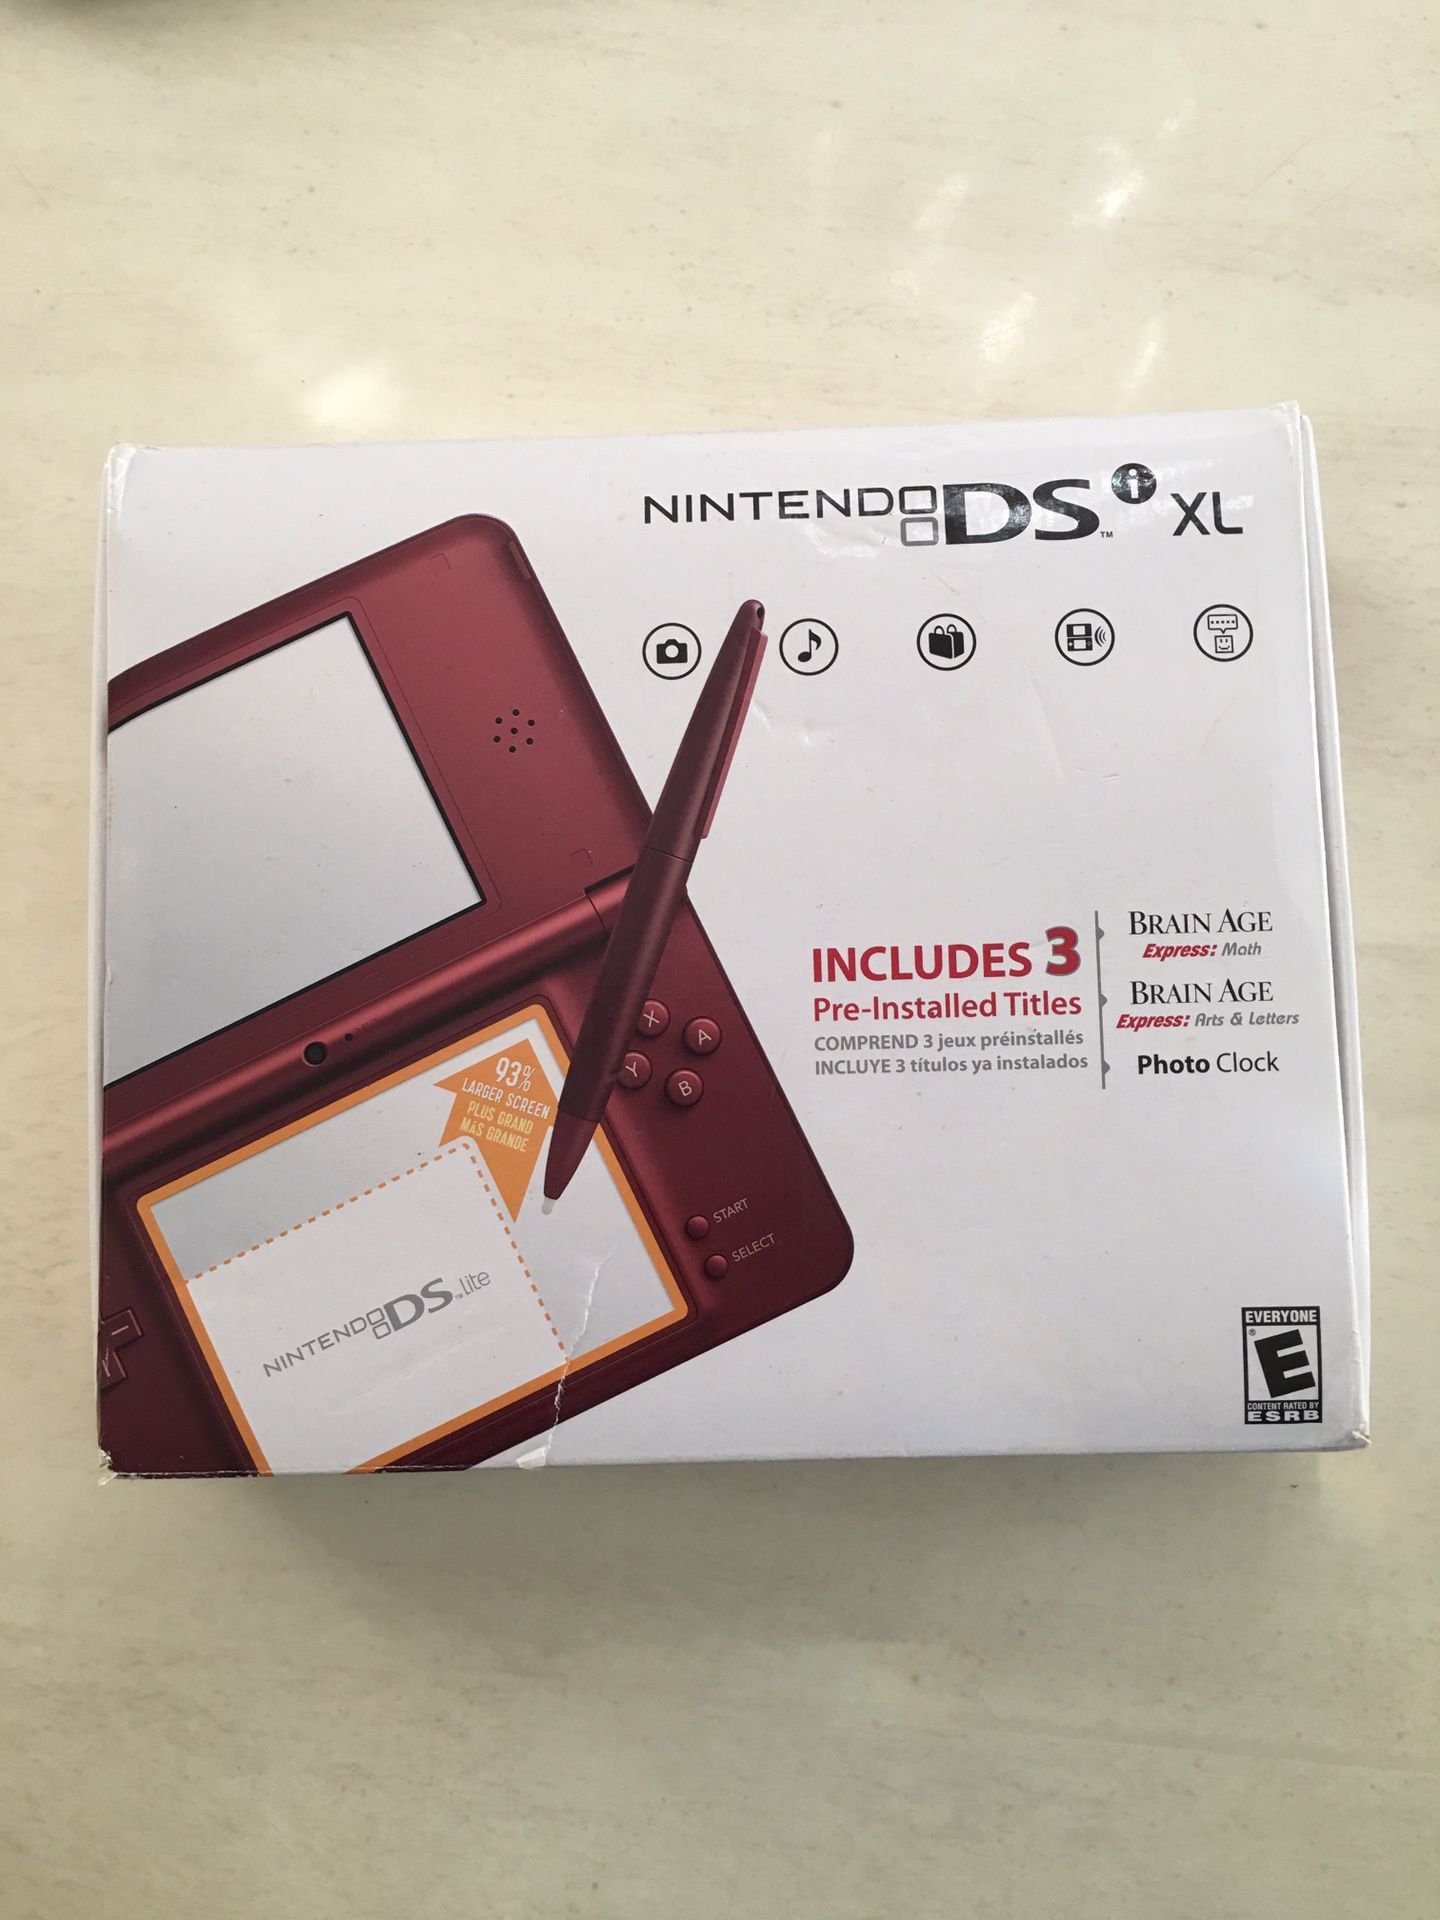 Nintendo DS XL.Look as NEW,in original box with Manual and 4 Screen Protector.